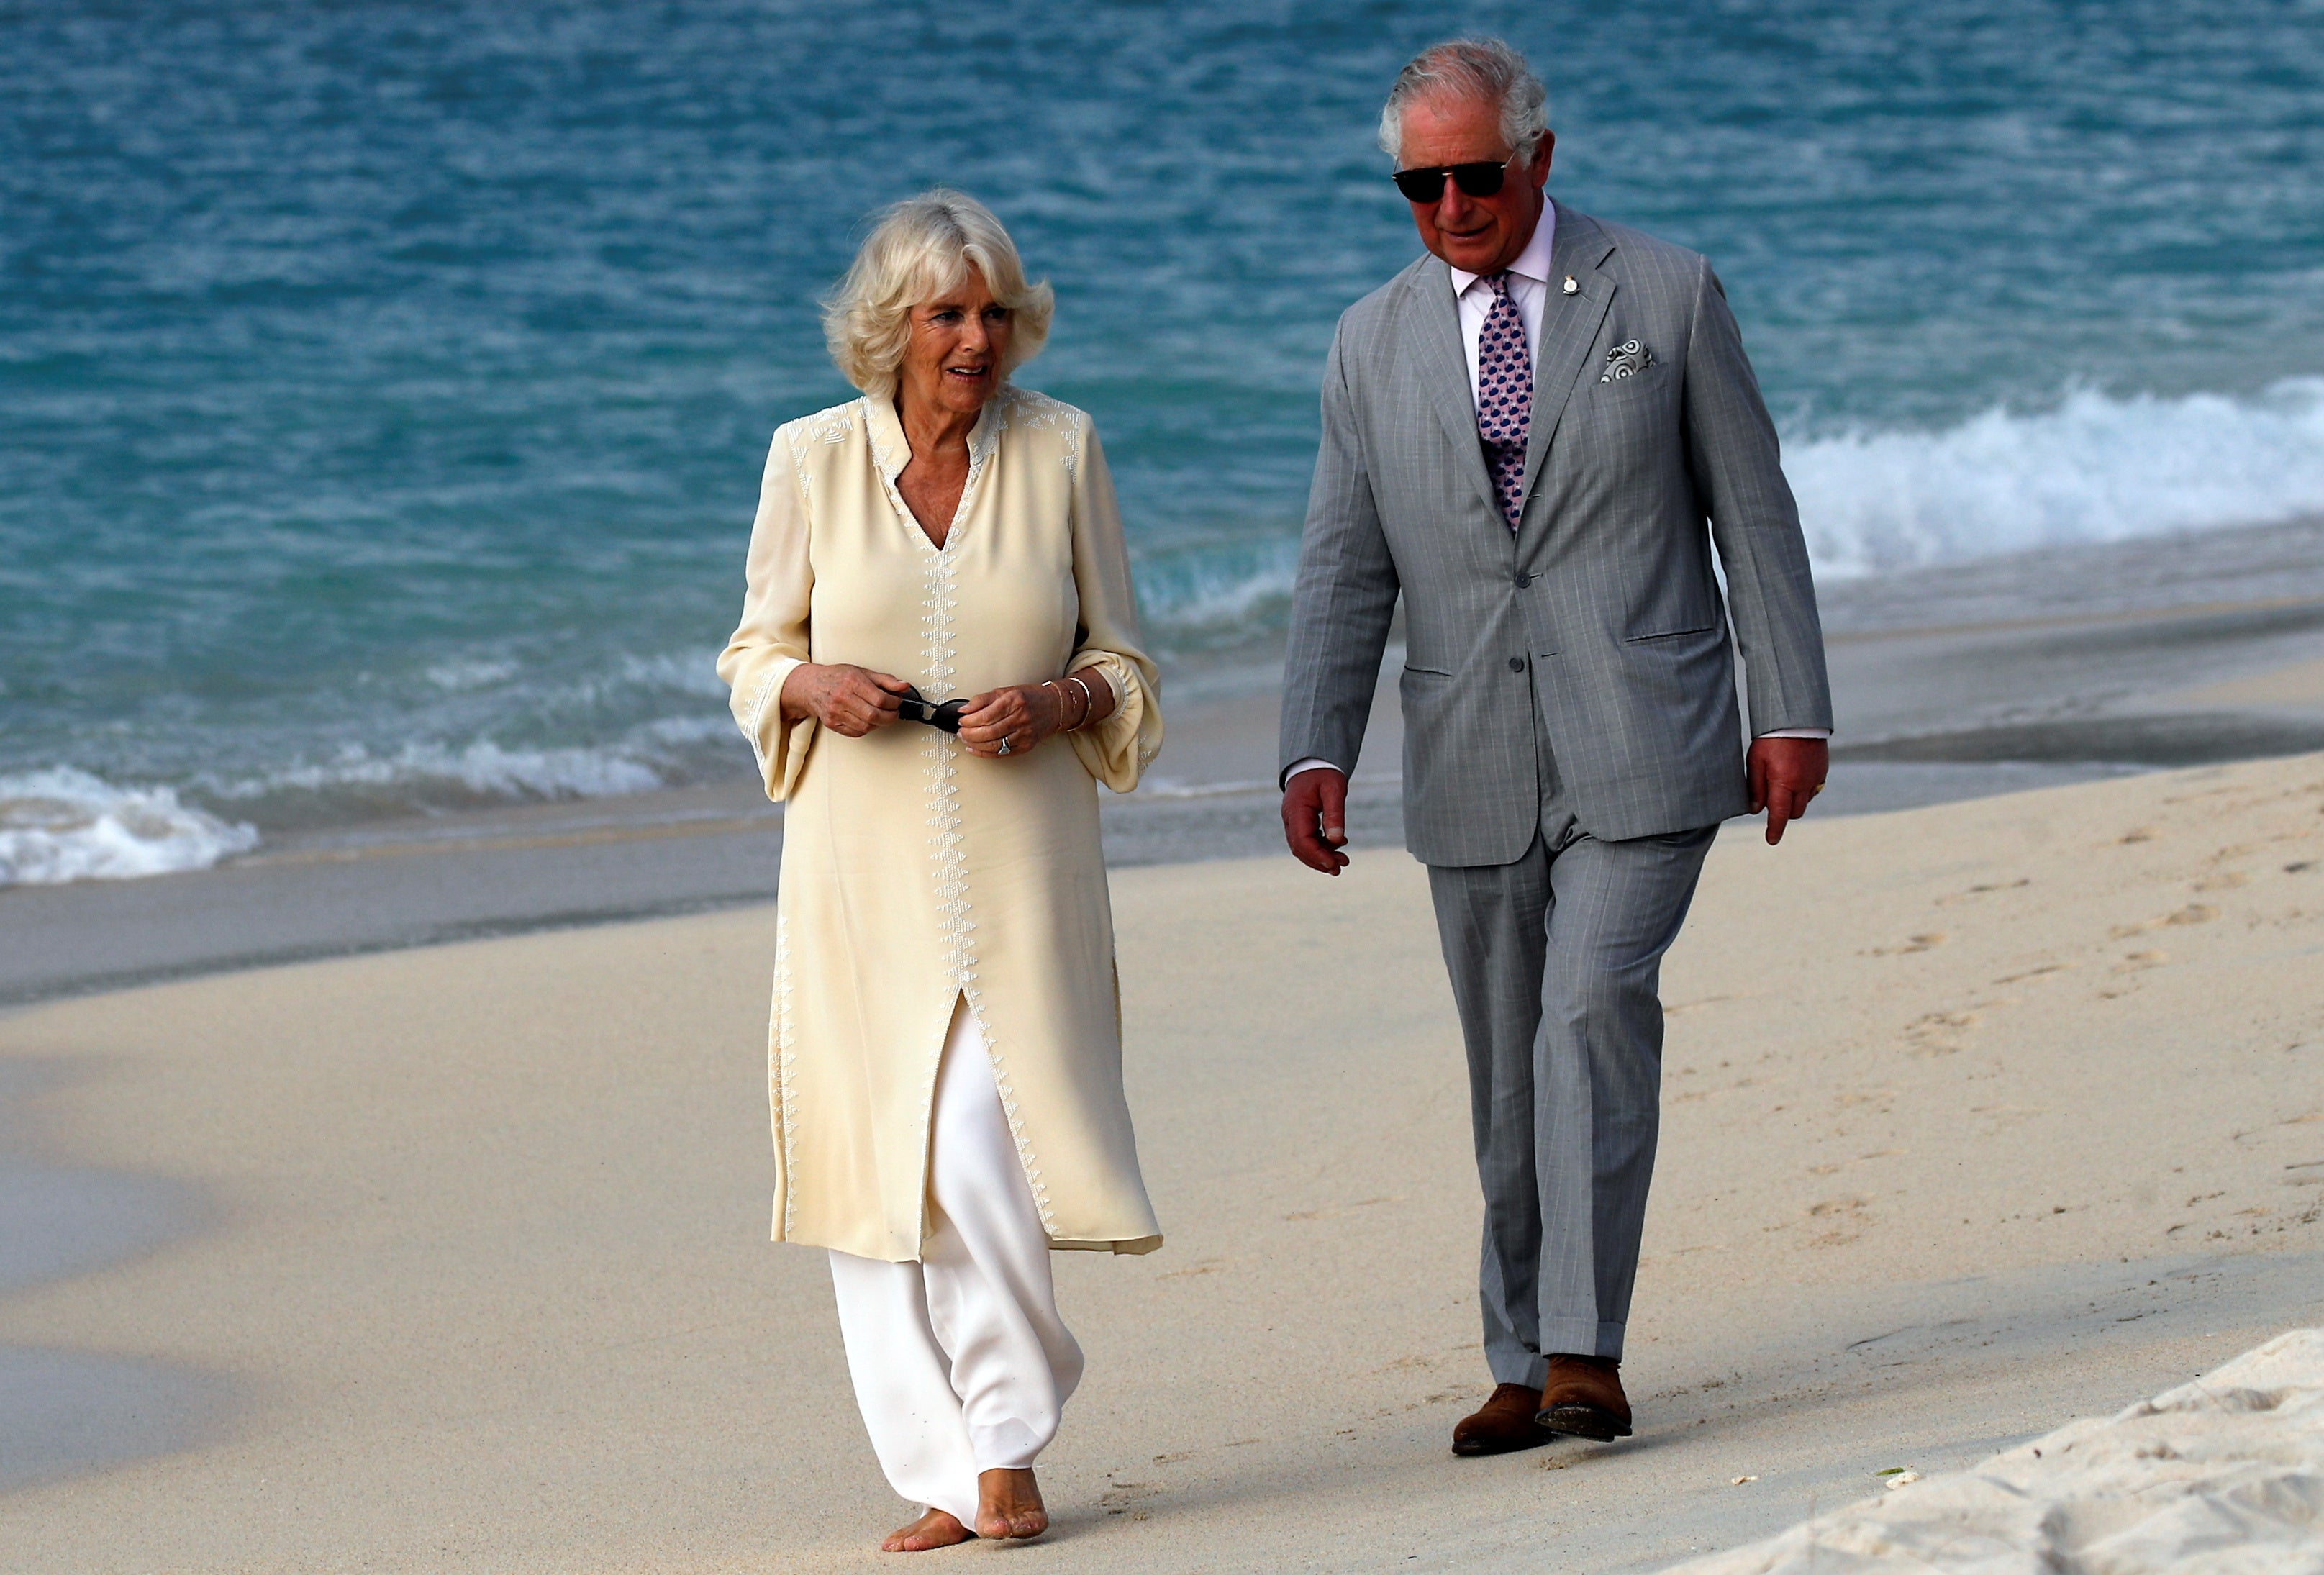 Charles and Camillia visited Grenada five years ago. Charles said he had ’special memories’ from the trip